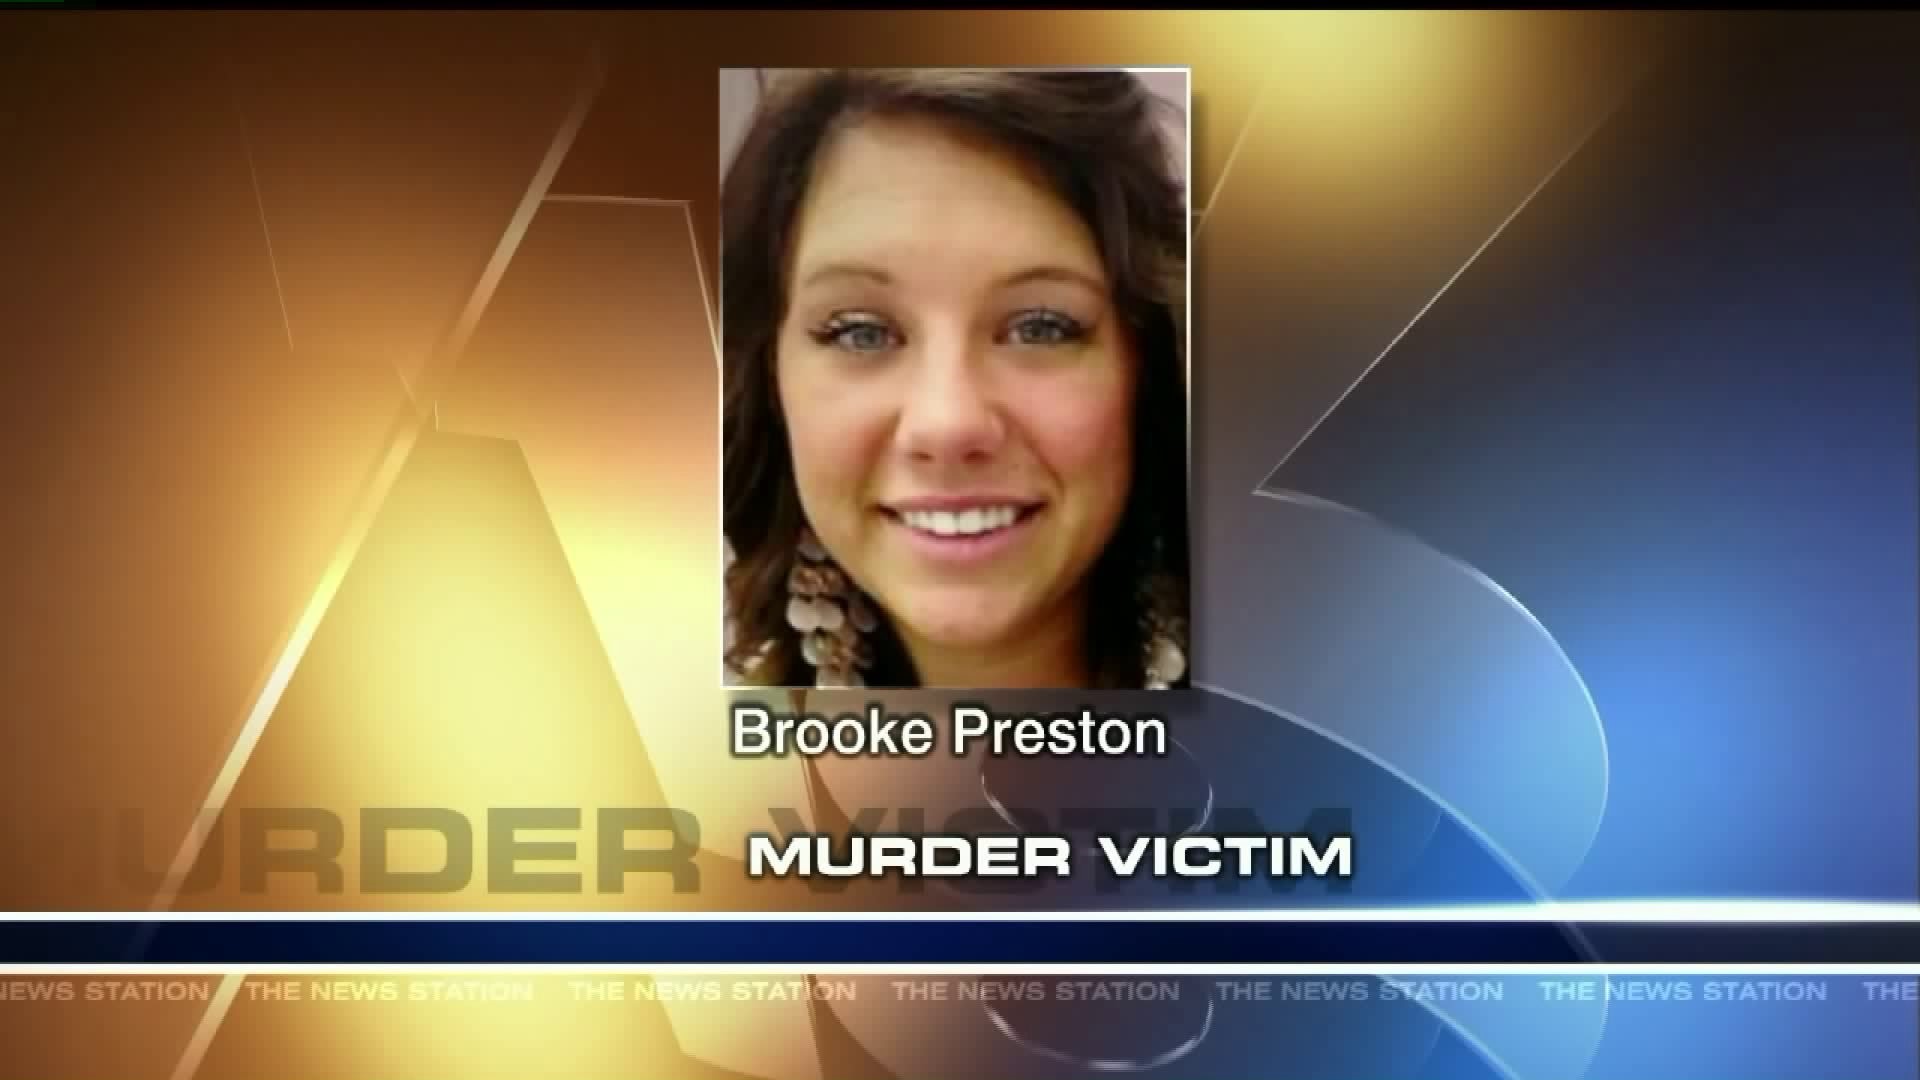 Woman Killed in Florida was Headed Home to Wyalusing